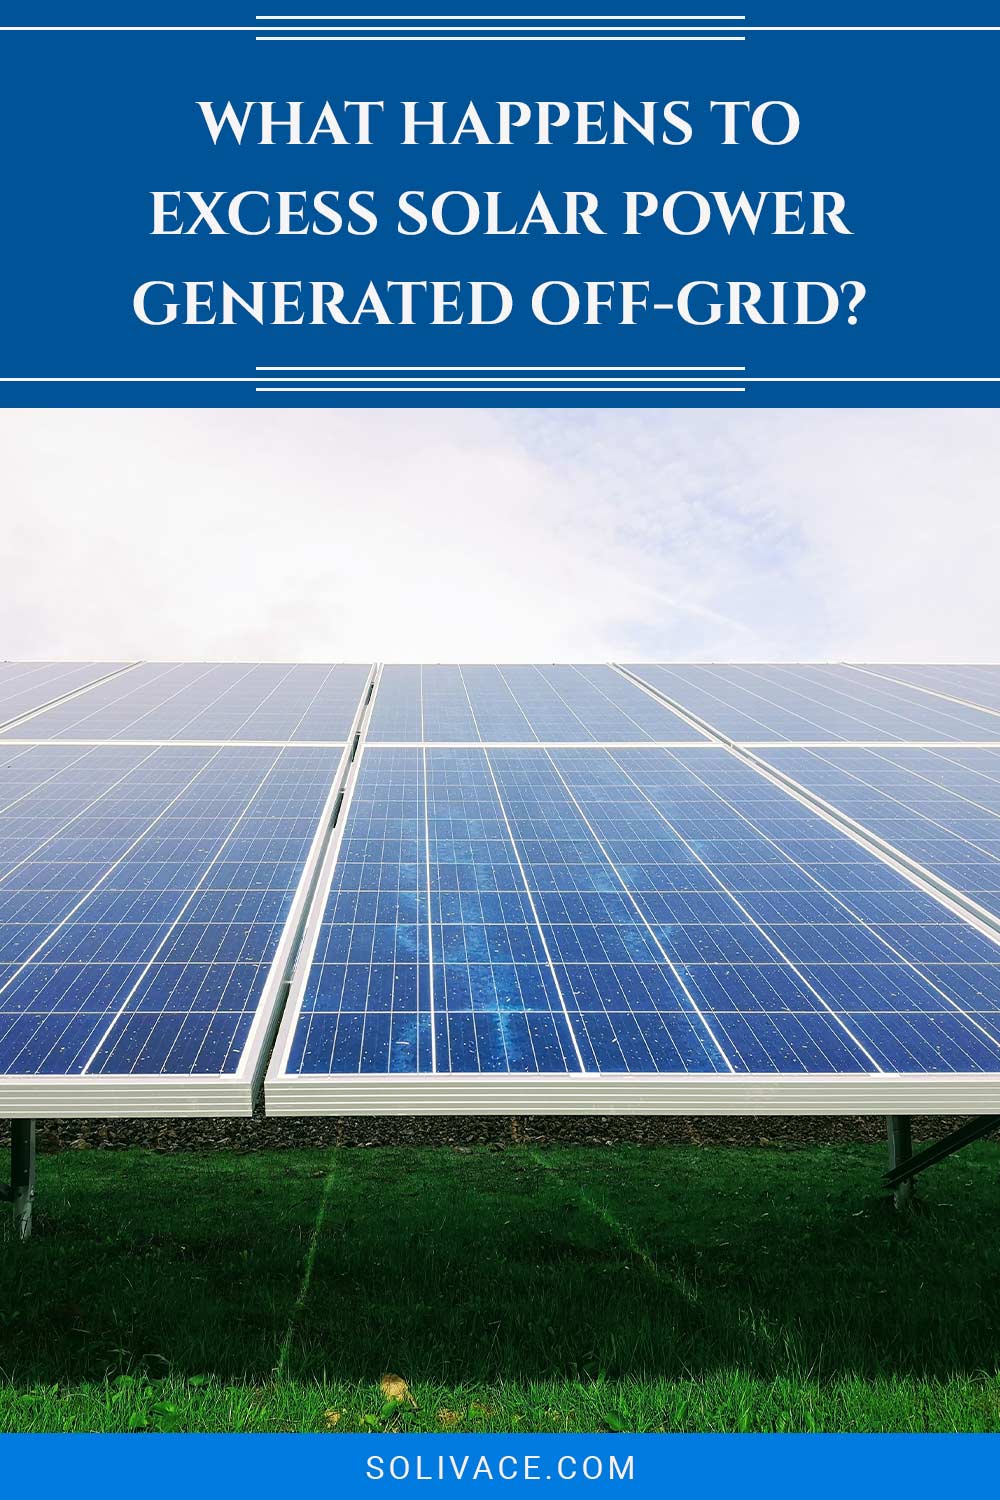 What Happens To Excess Solar Power Generated Off-Grid?